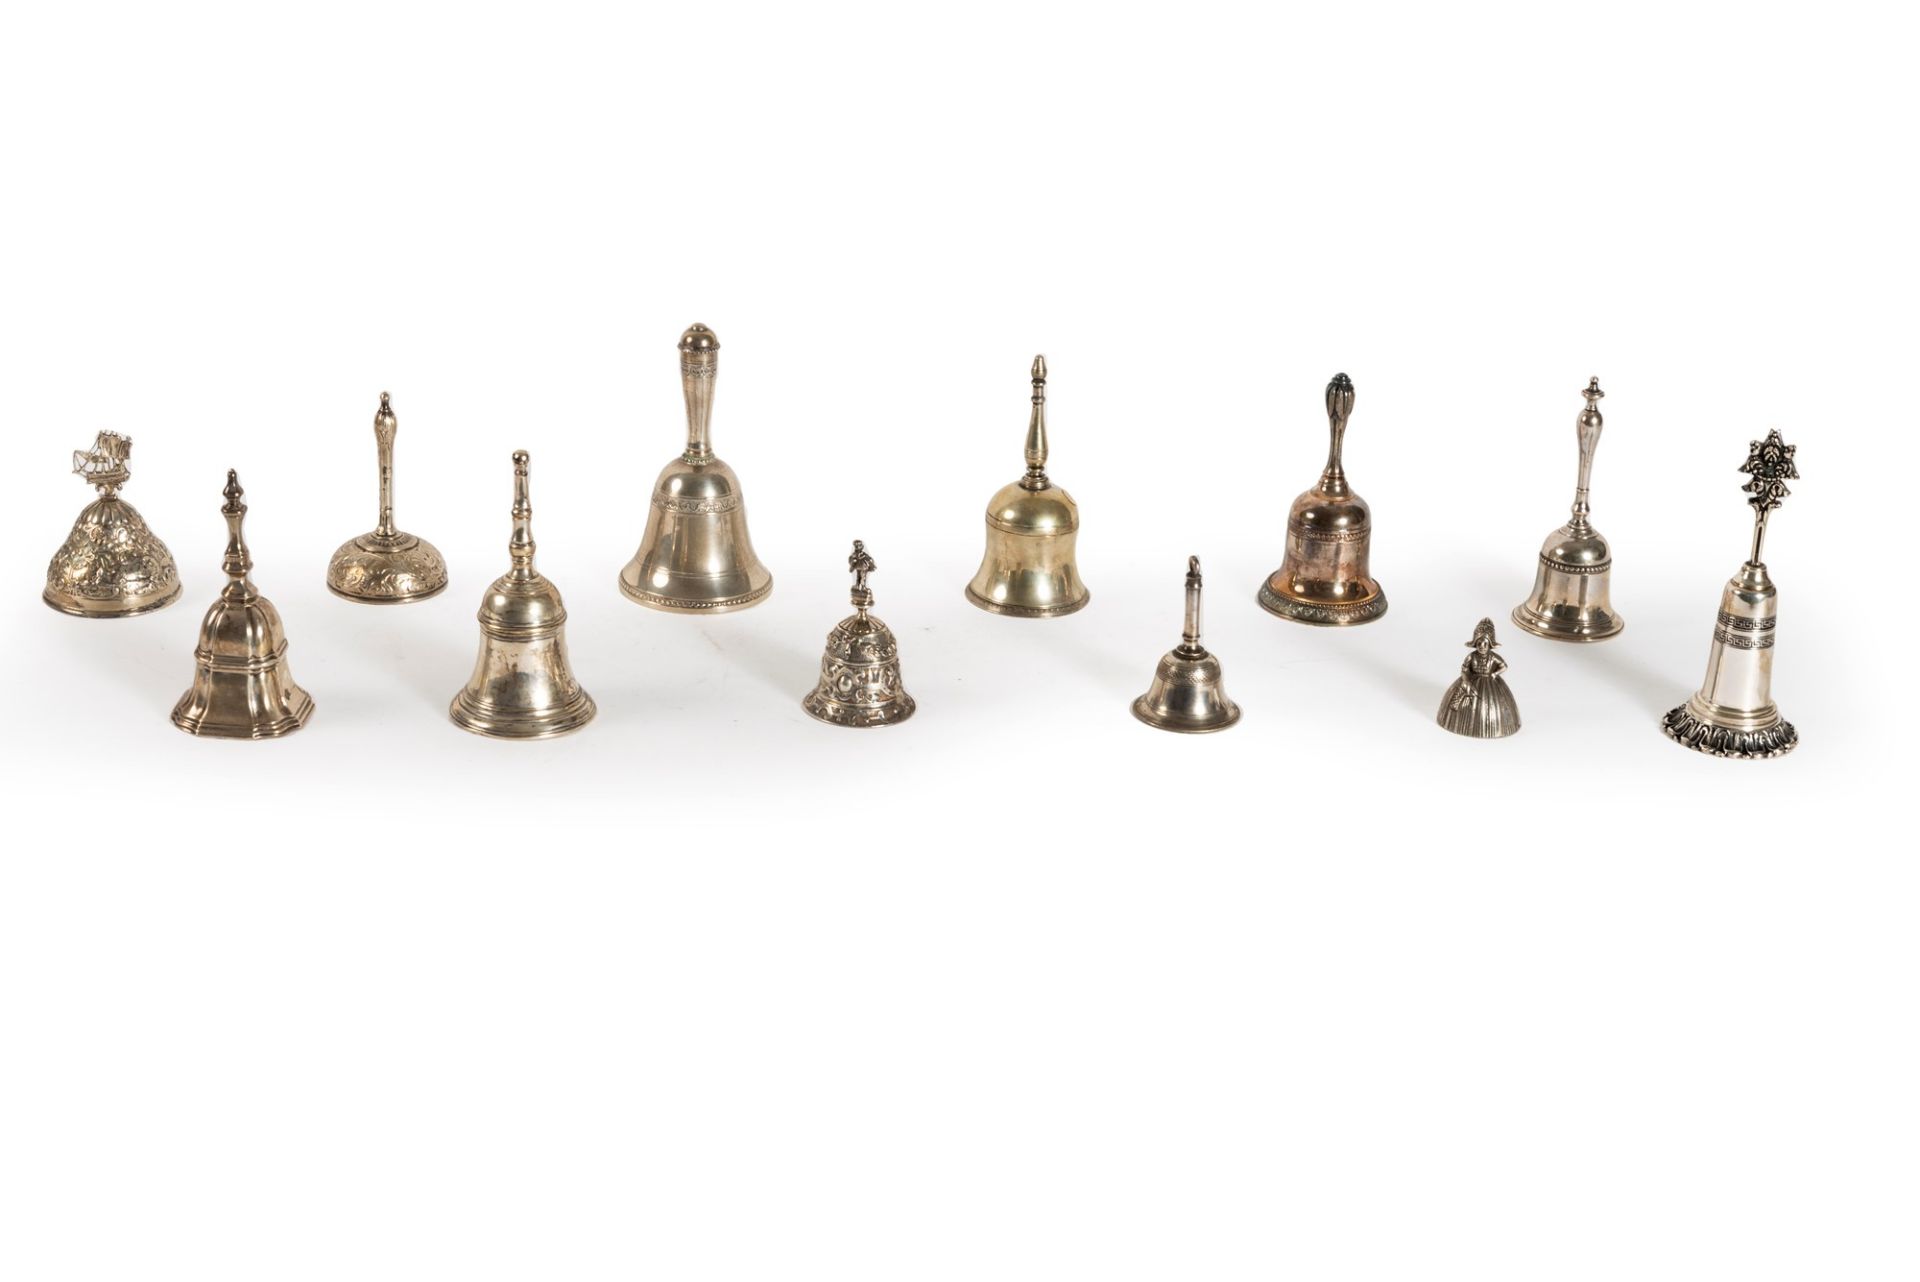 Lot consisting of twelve silver bells, late 19th century - early 20th century